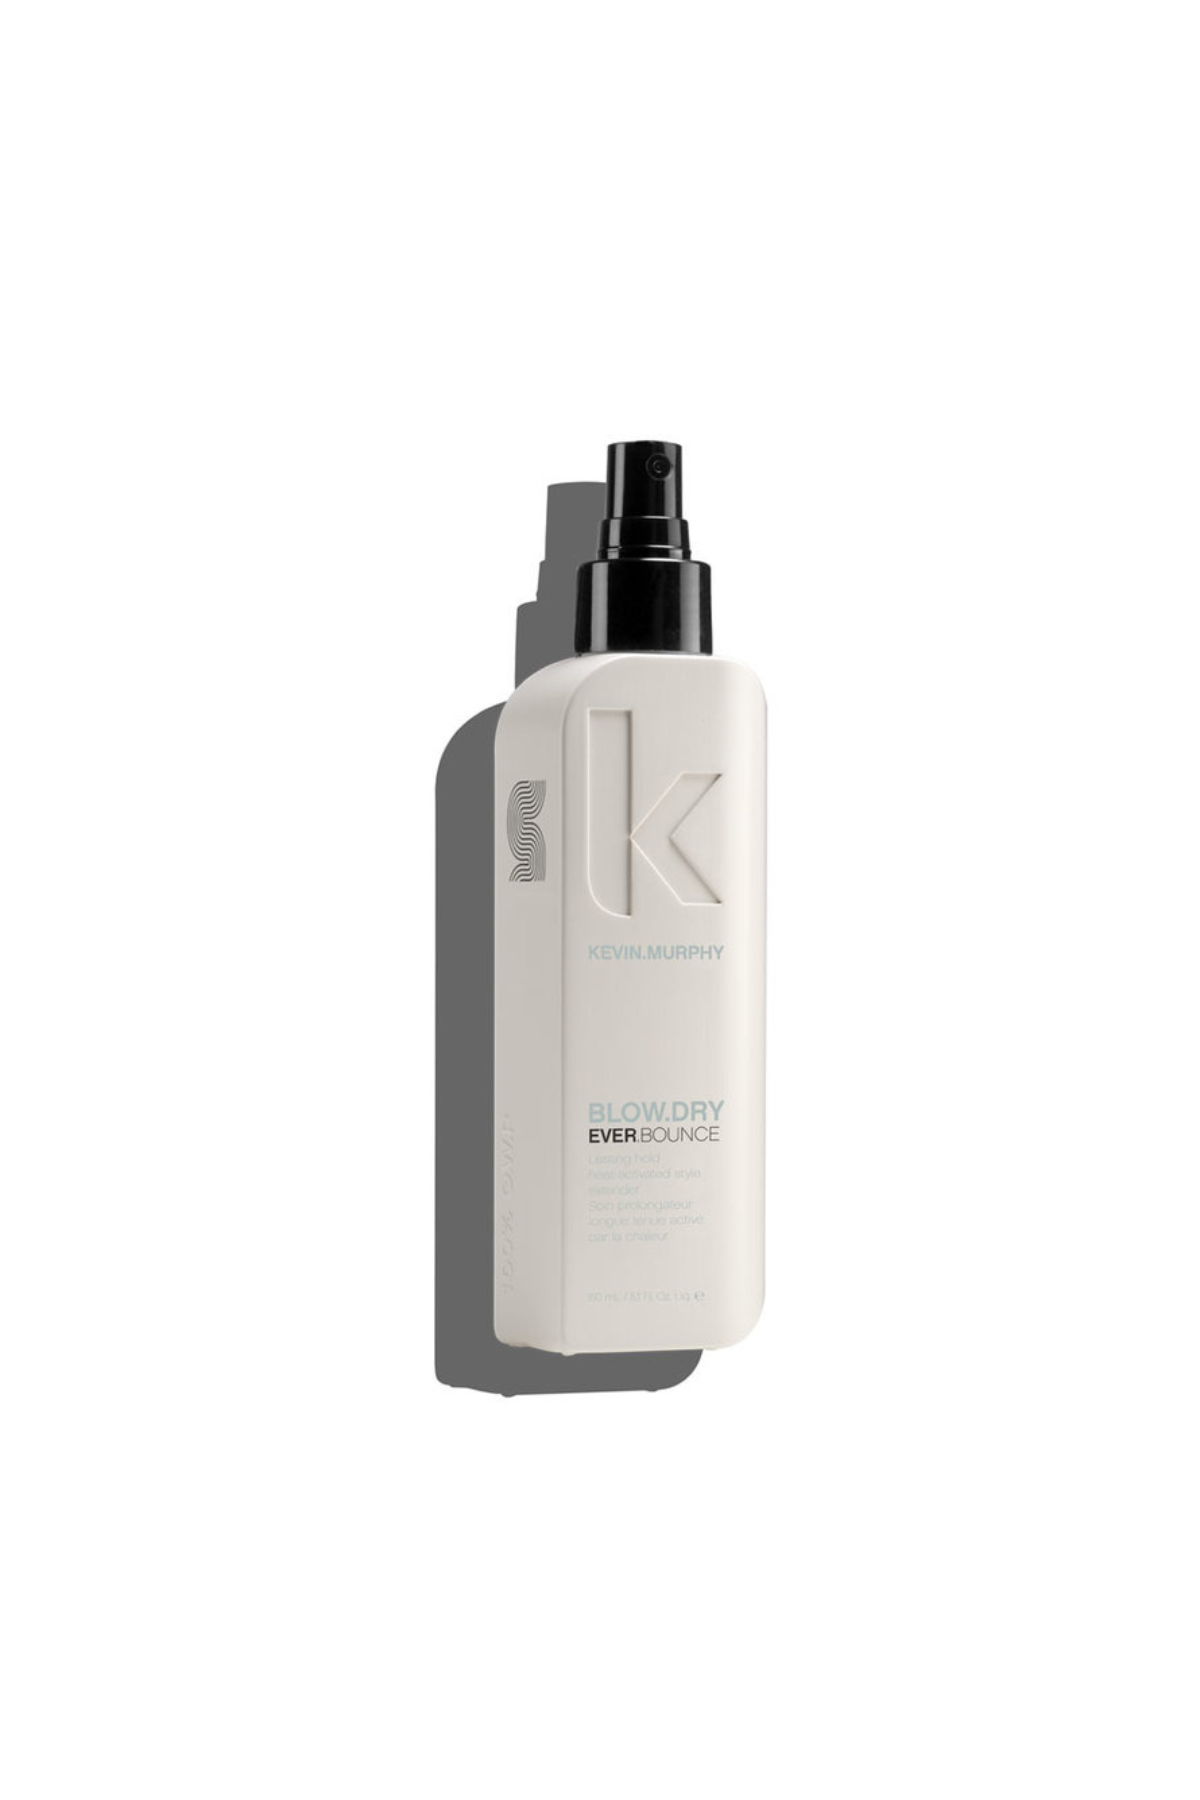 Kevin Murphy Blowdry Ever Bounce